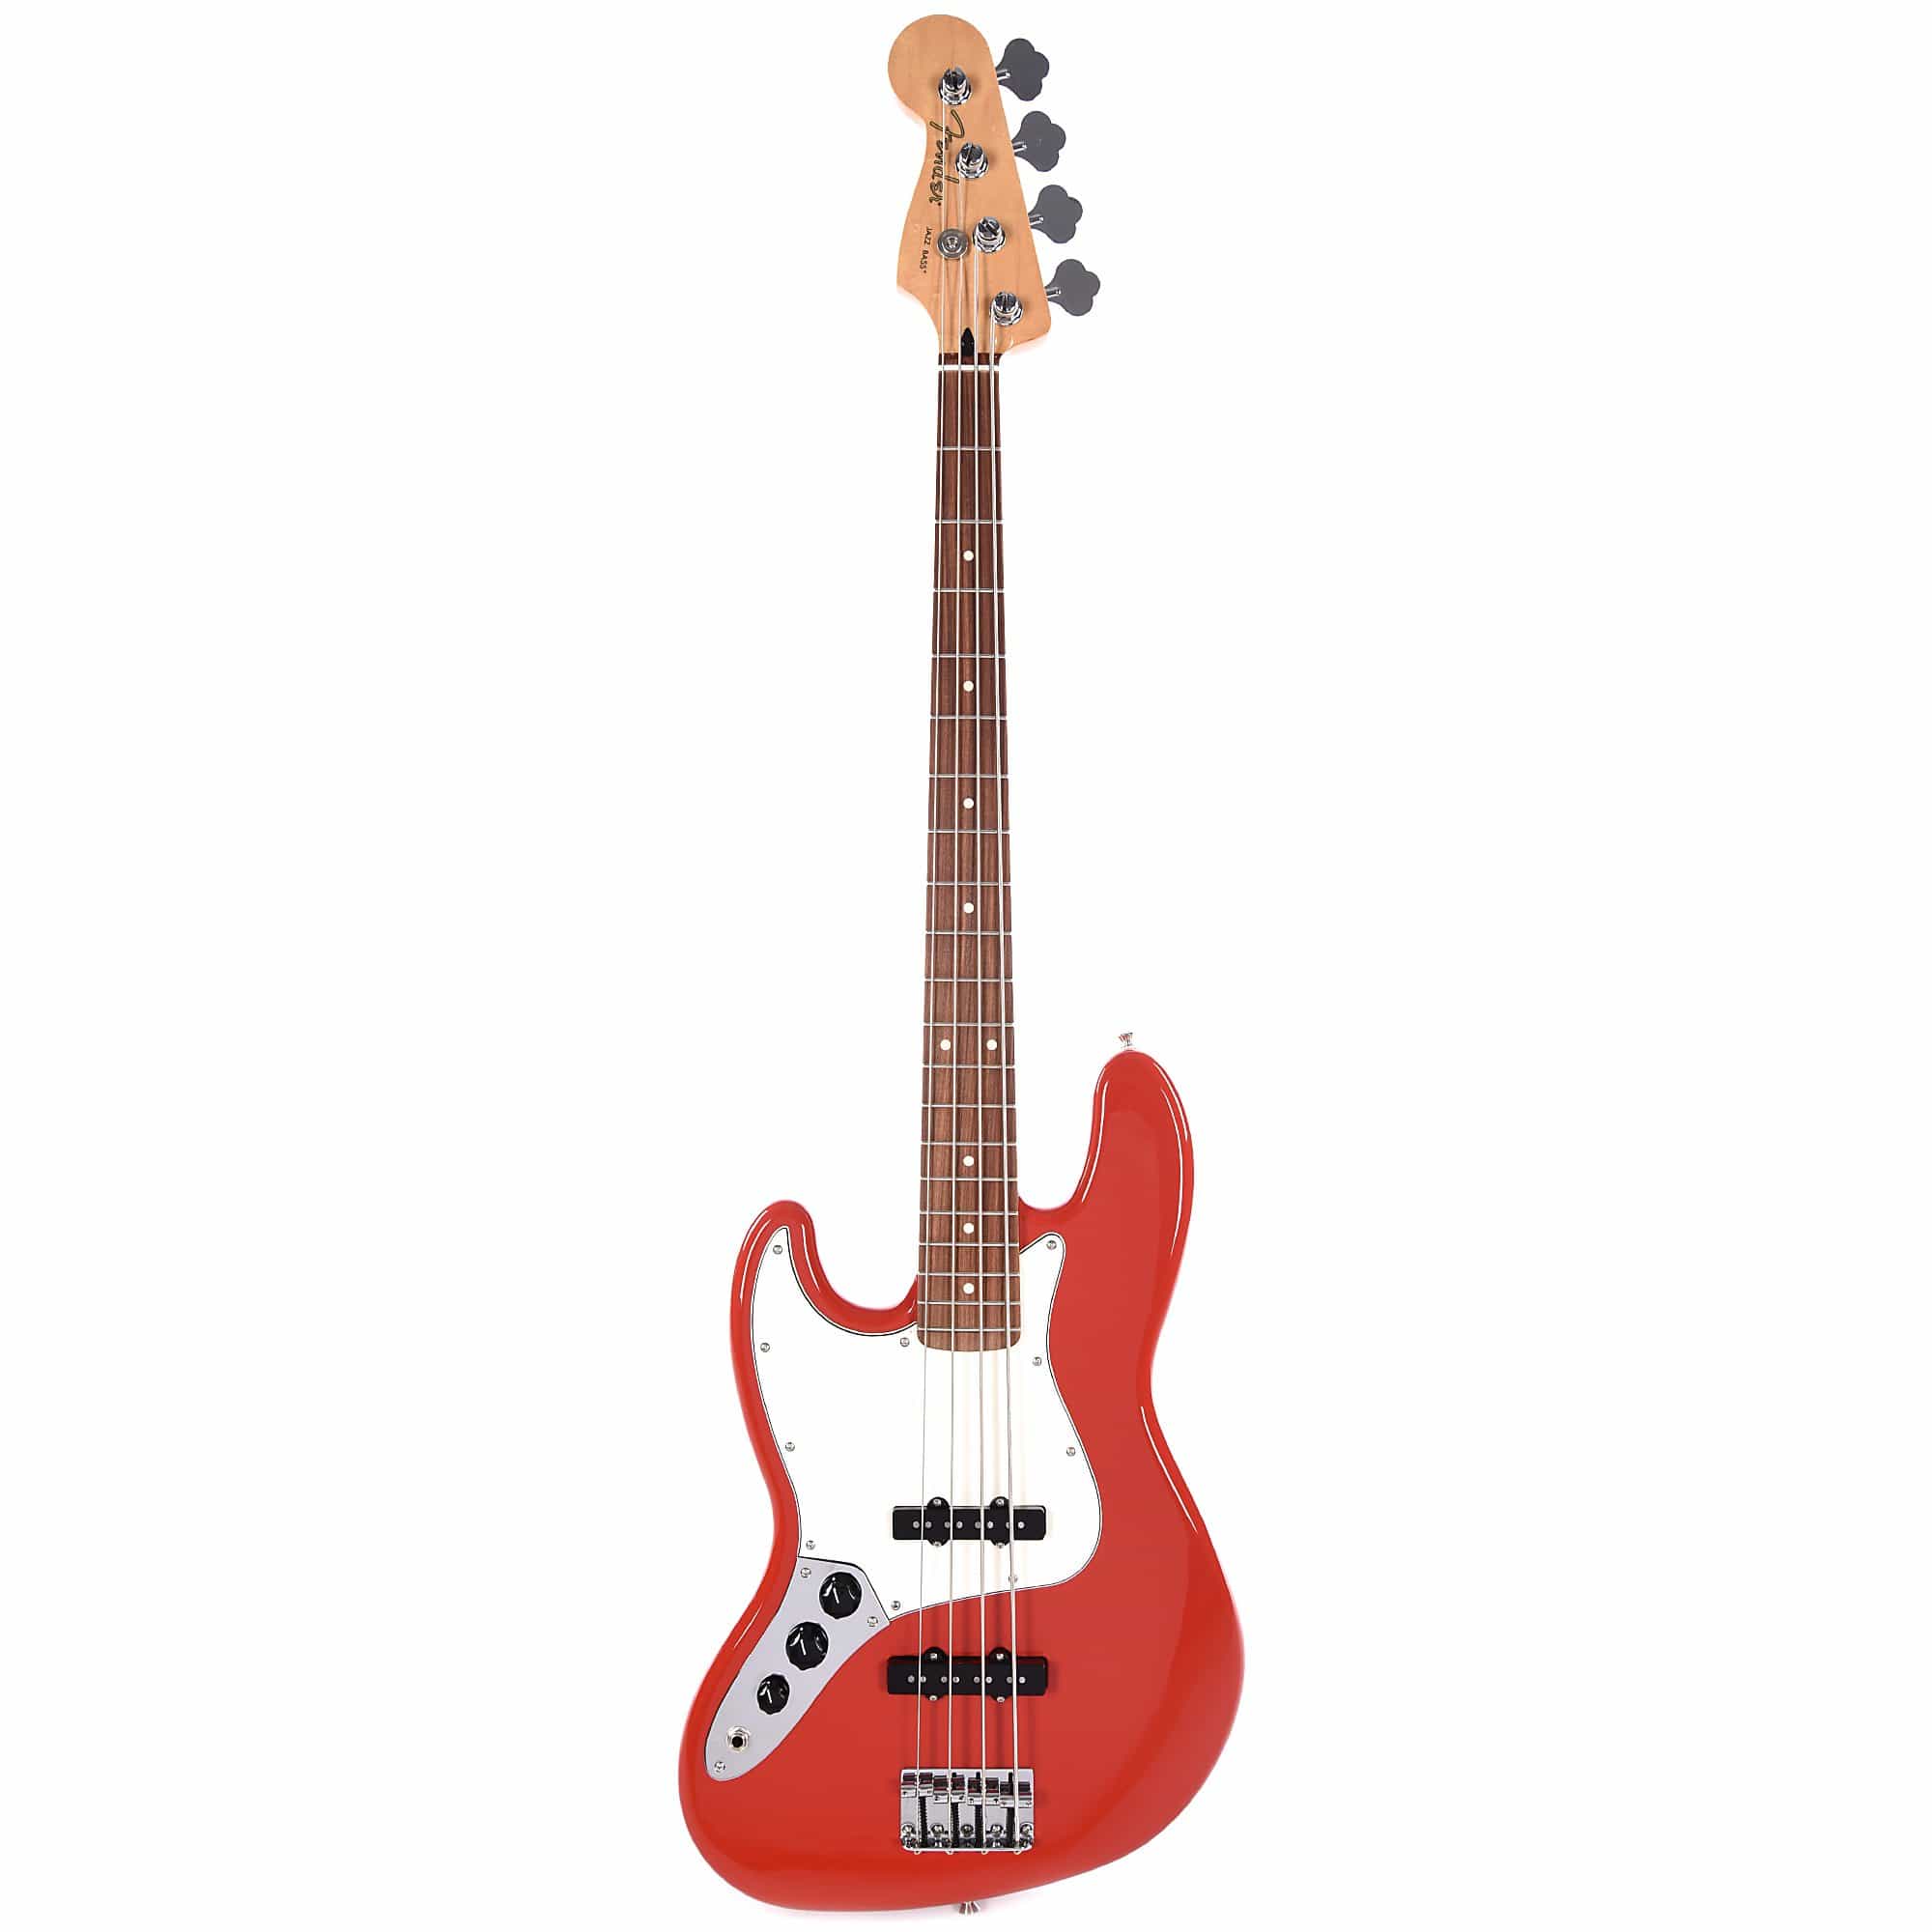 Fender Player Jazz Bass LEFTY Sonic Red Bundle w/Fender Gig Bag, Stand, Cable, Tuner, Picks and Strings Bass Guitars / 4-String,Bass Guitars / Left-Handed